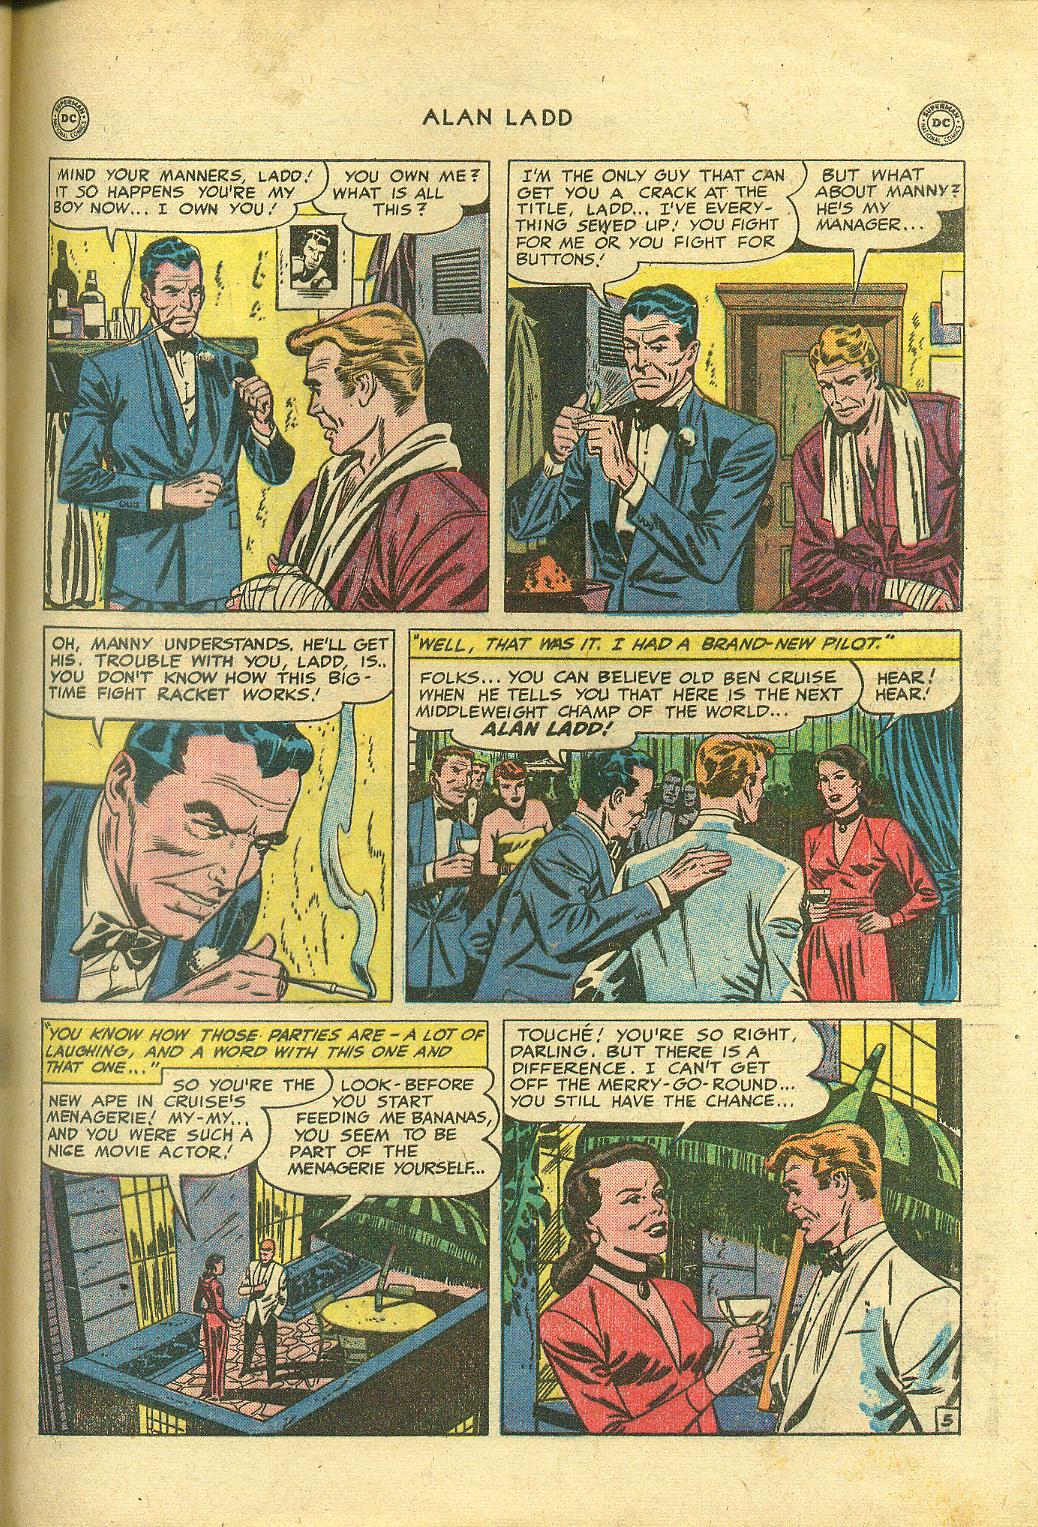 Read online Adventures of Alan Ladd comic -  Issue #2 - 43